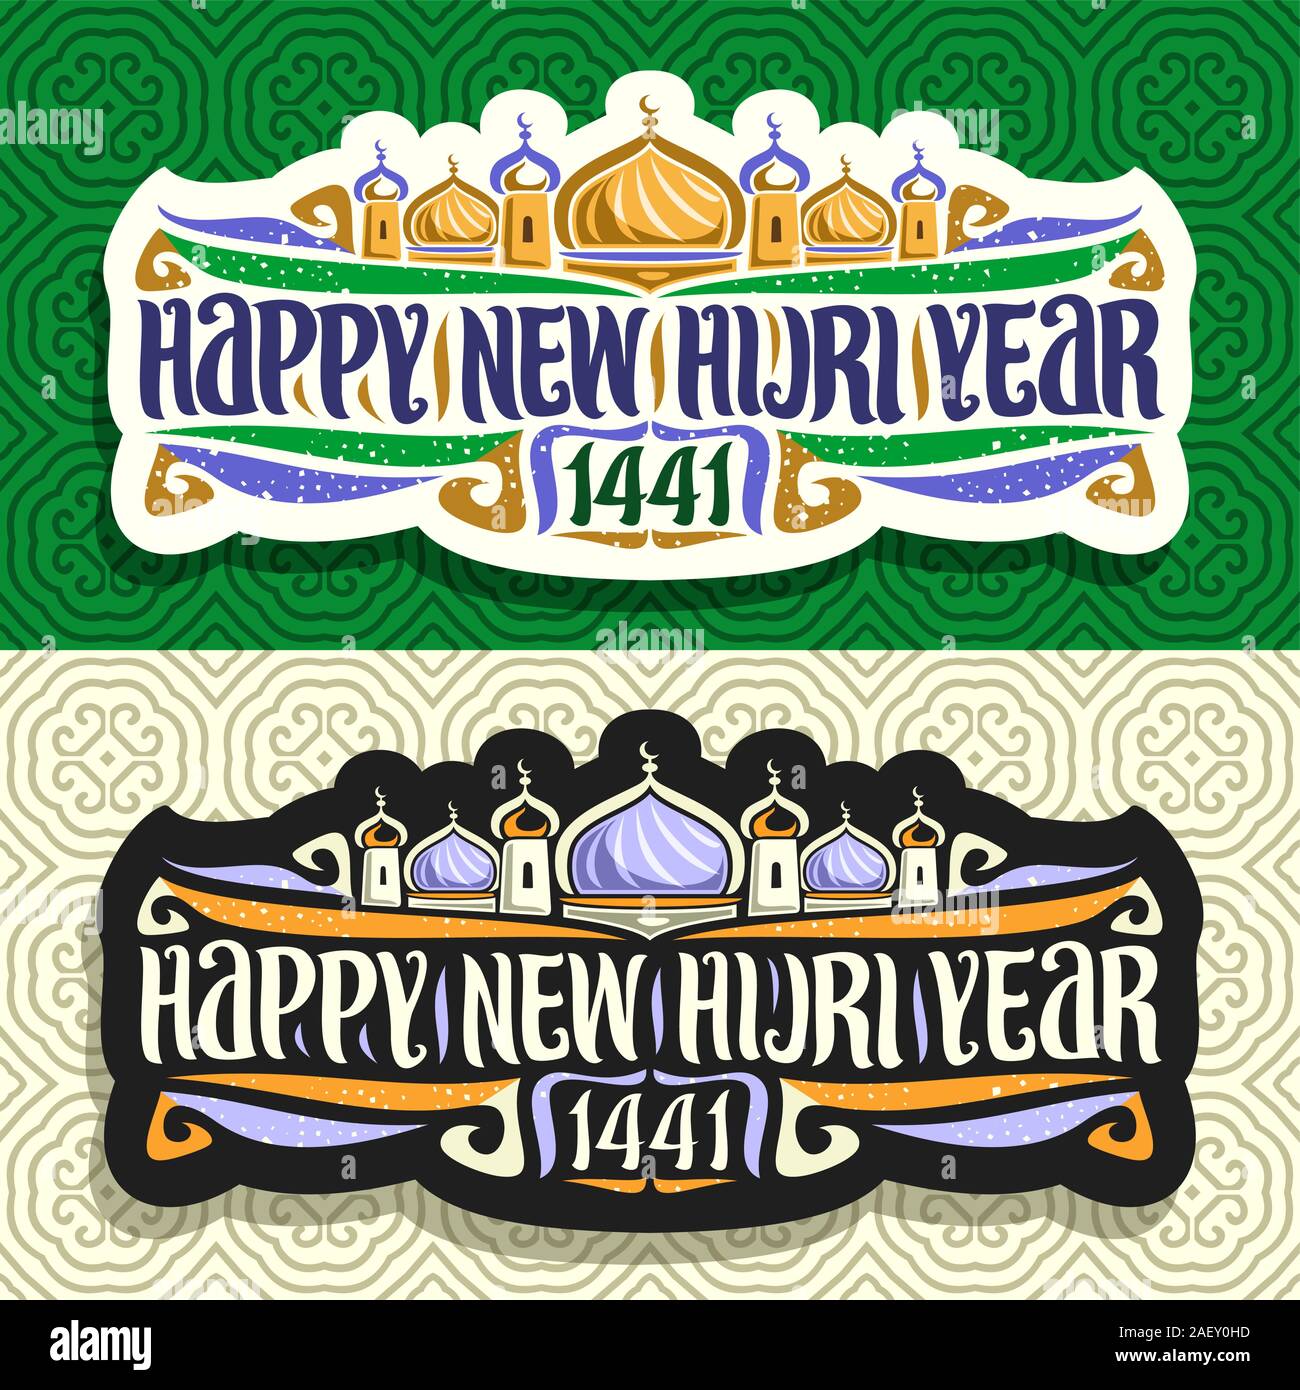 Vector logos for Islamic New Year, 2 stickers with muslim mosque on day and night background, original brush type for words happy new hijri year 1441, Stock Vector